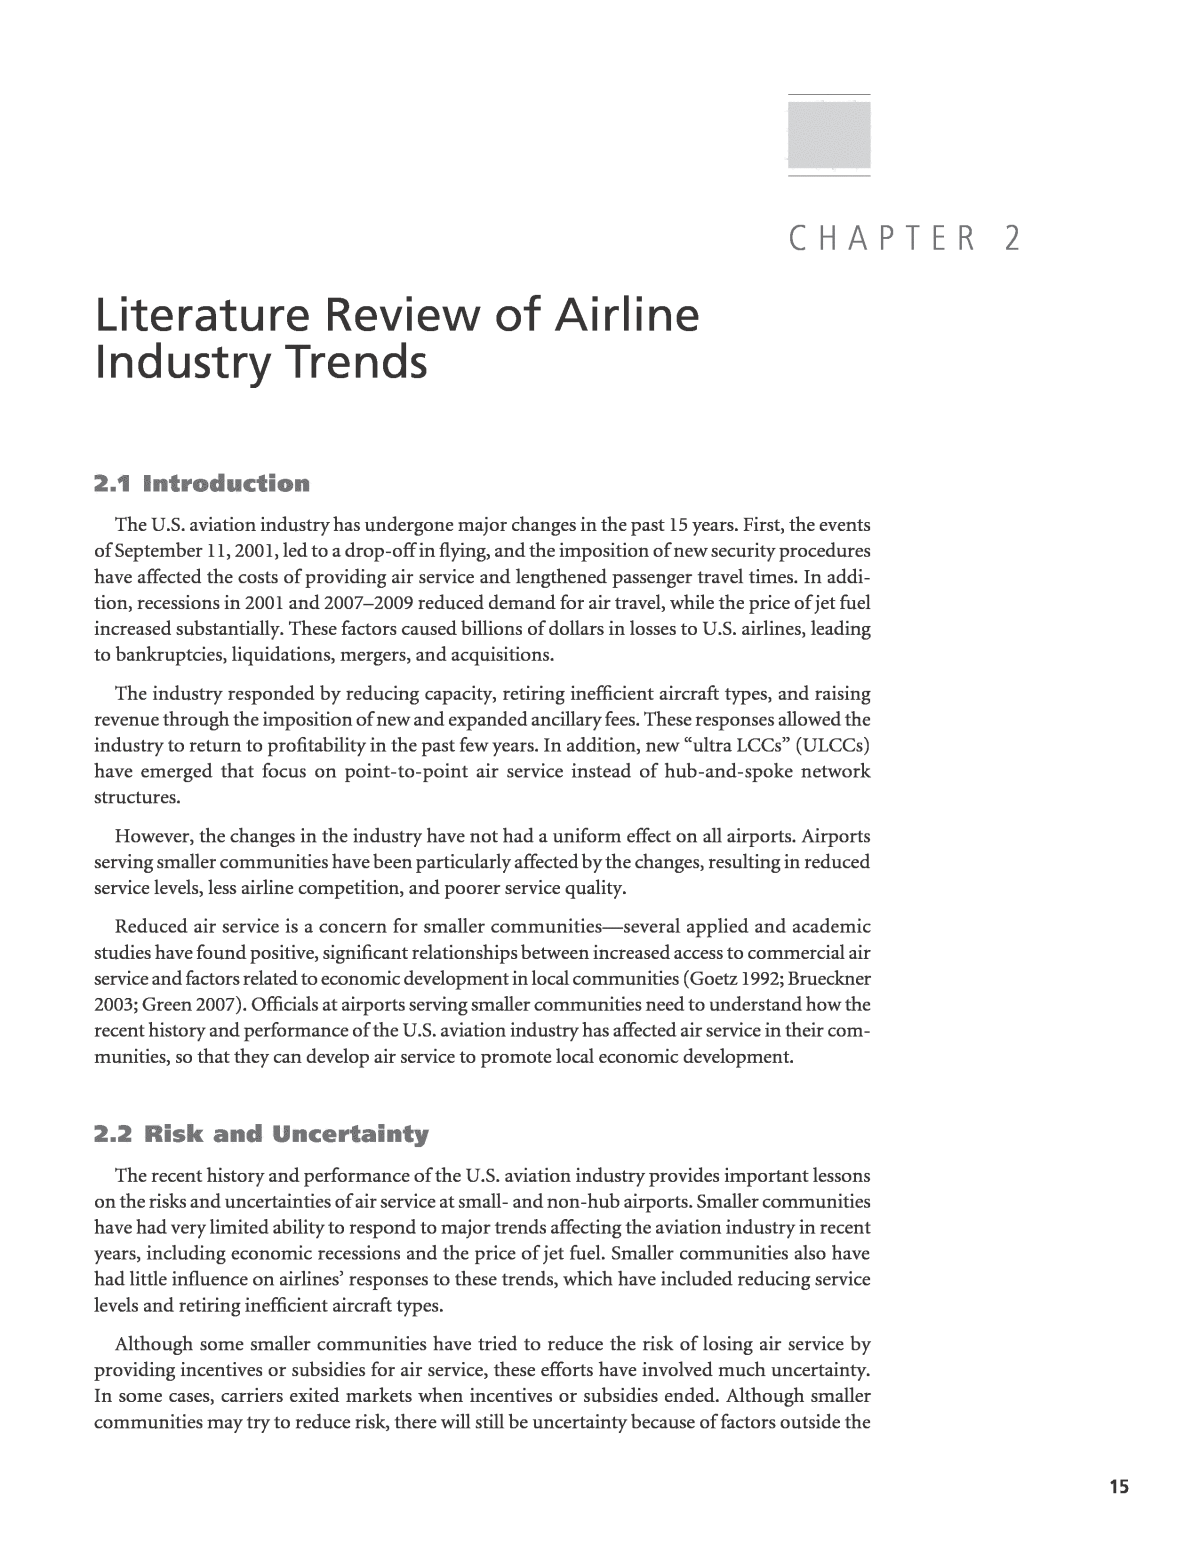 Buy Literature Review Online from Expert Literature Review Writers